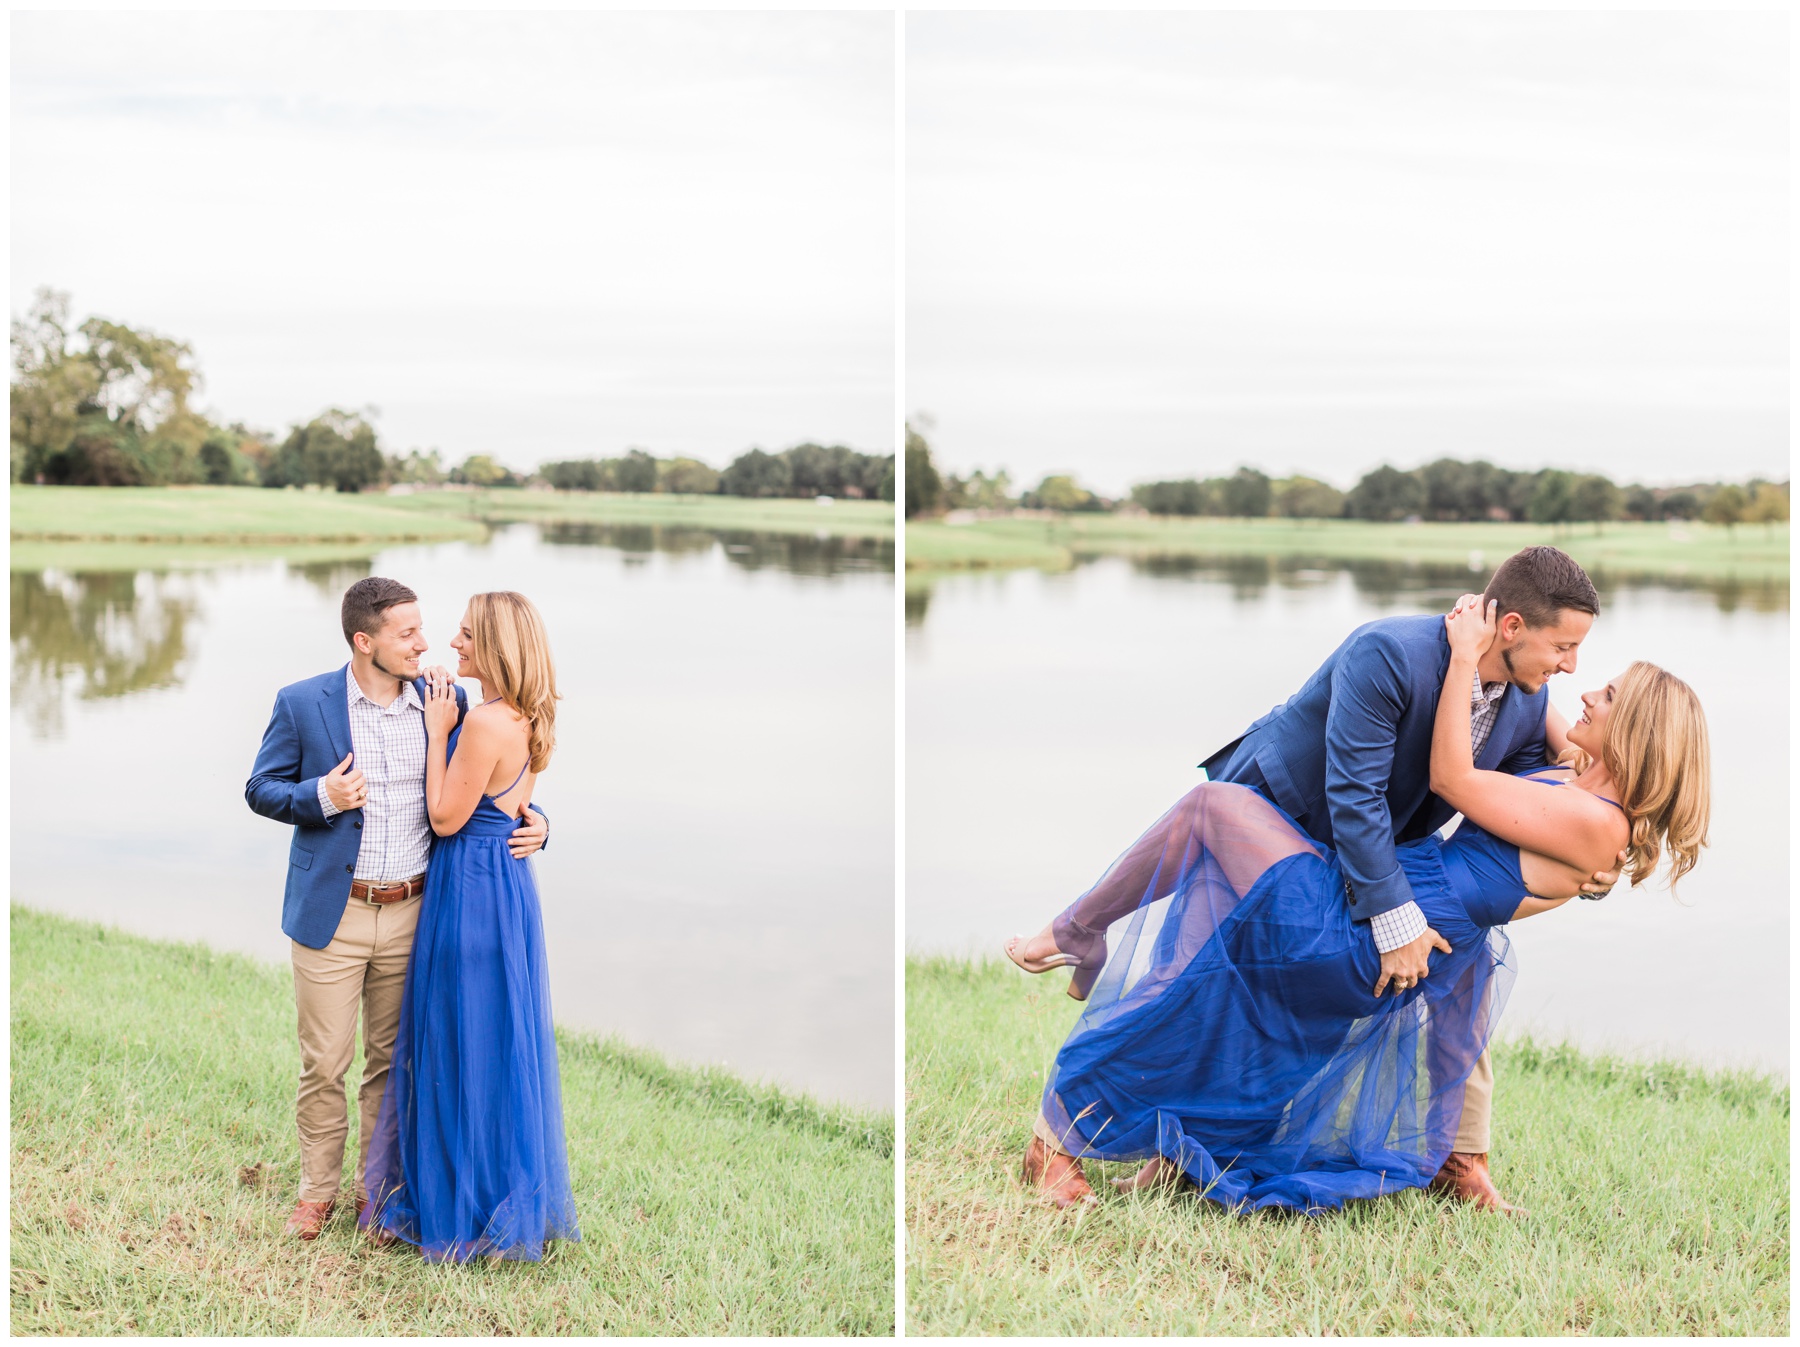 Formal engagement session by a lake in Houston, Texas